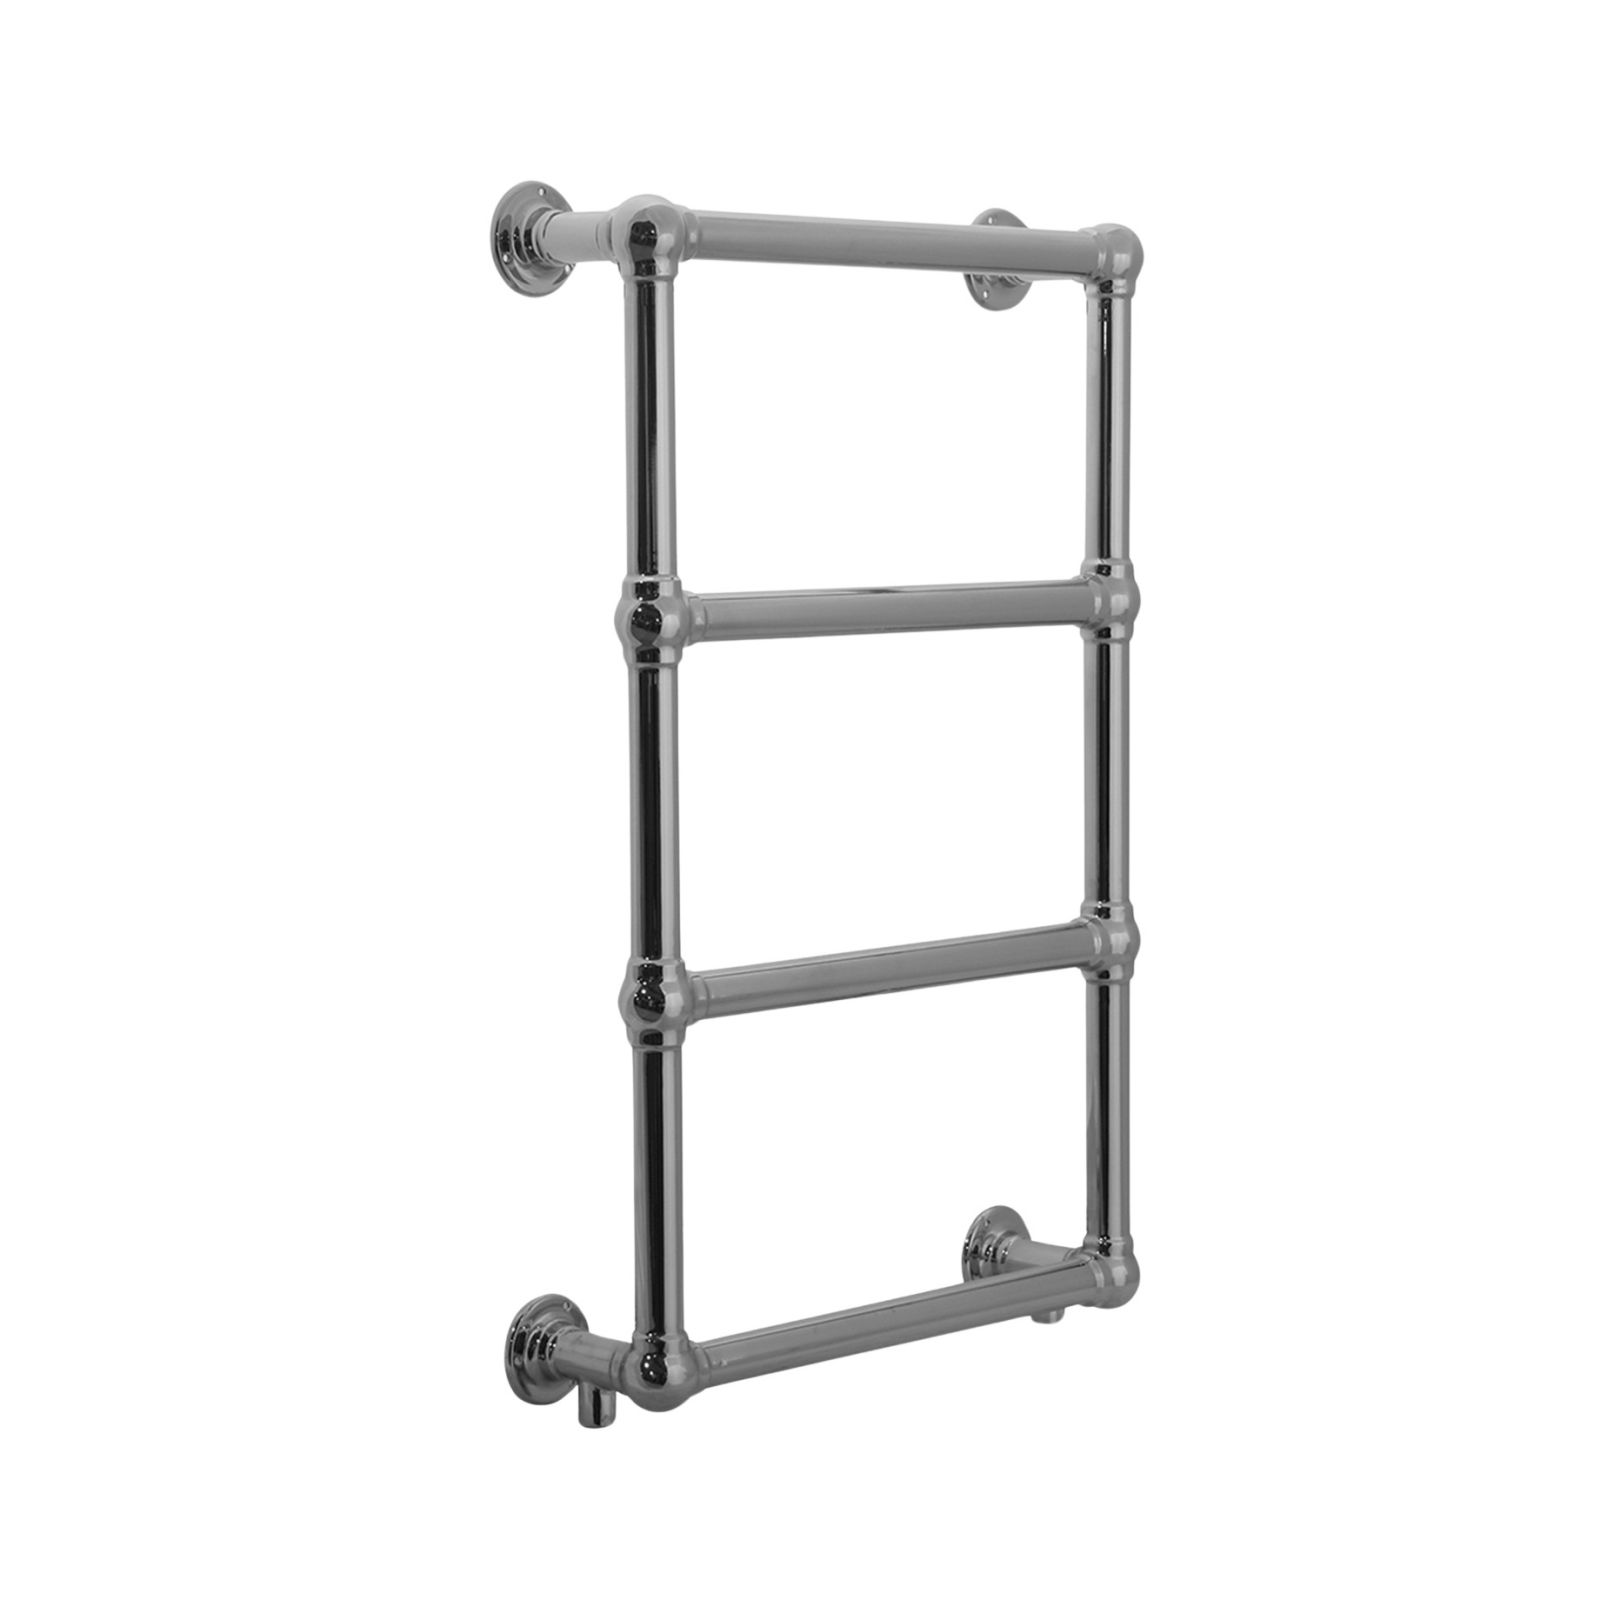 Bessingham Heated Towel Rail 794x500mm in a chrome or copper finish